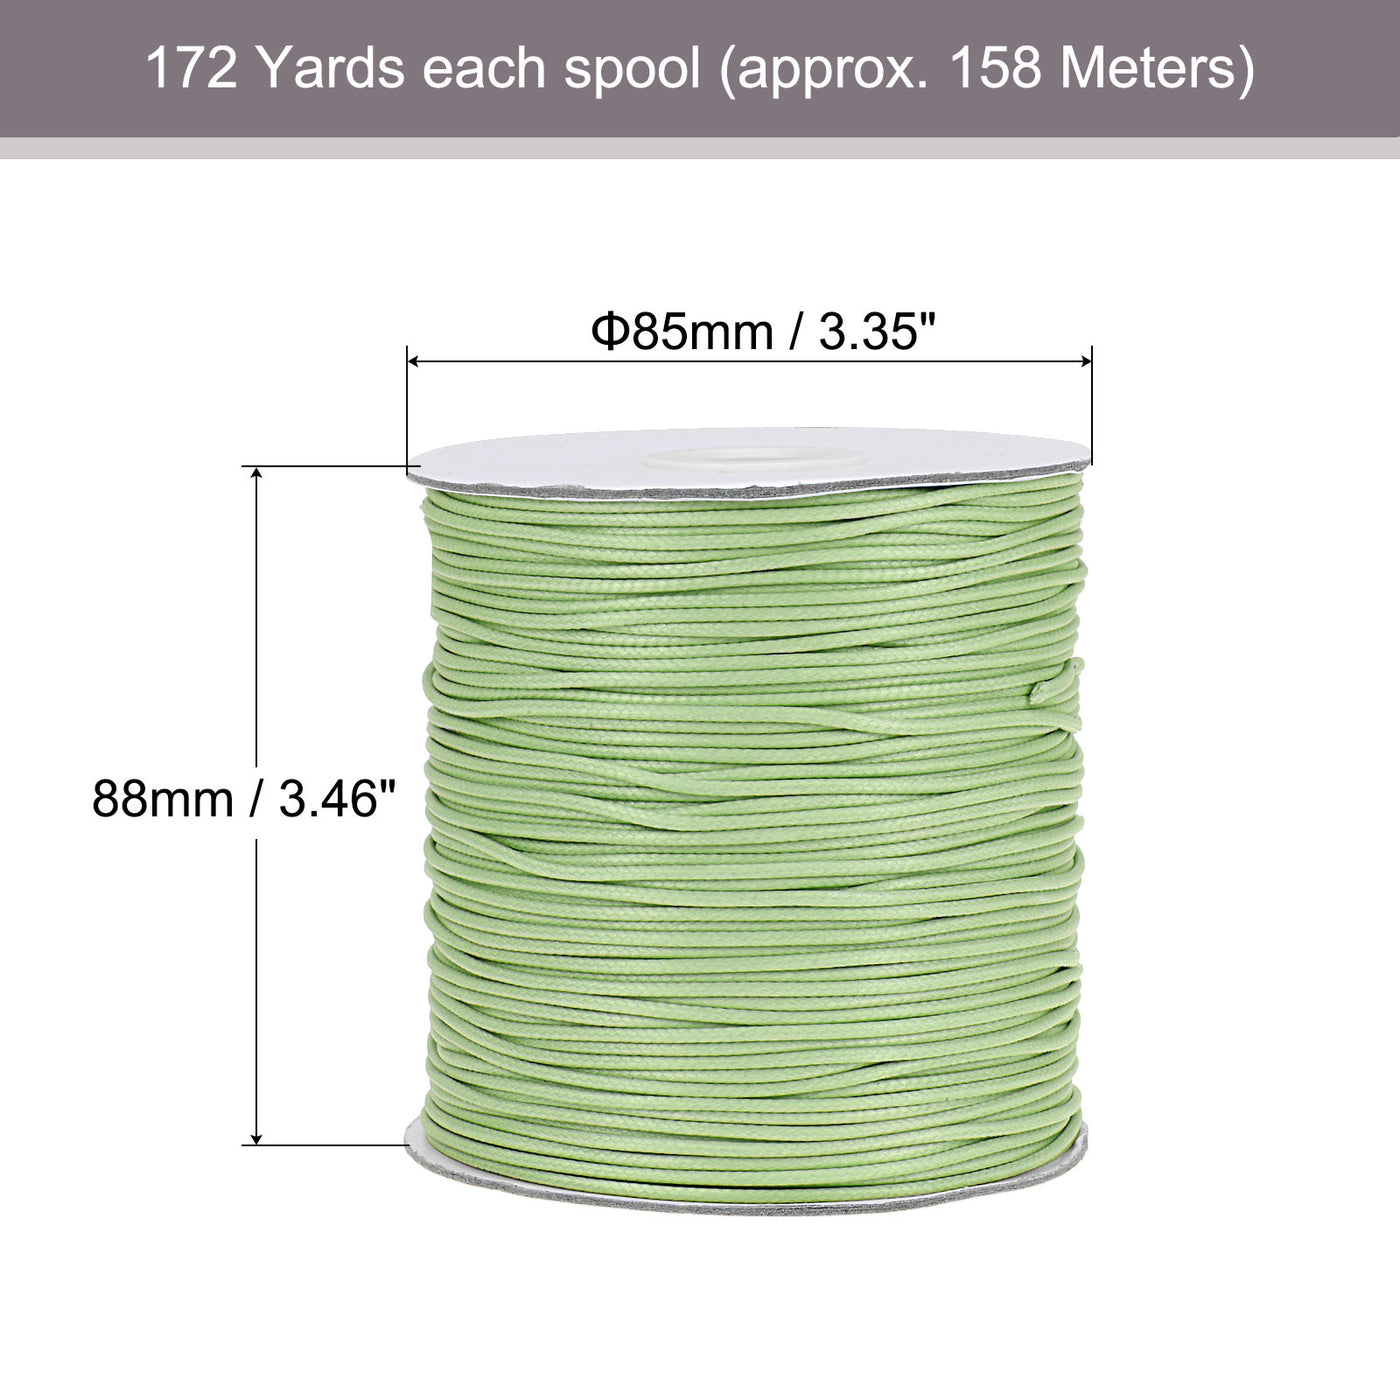 uxcell Uxcell 2pcs 1.5mm Waxed Polyester String 158M 172-Yard Bead Crafting Rope, Light Green